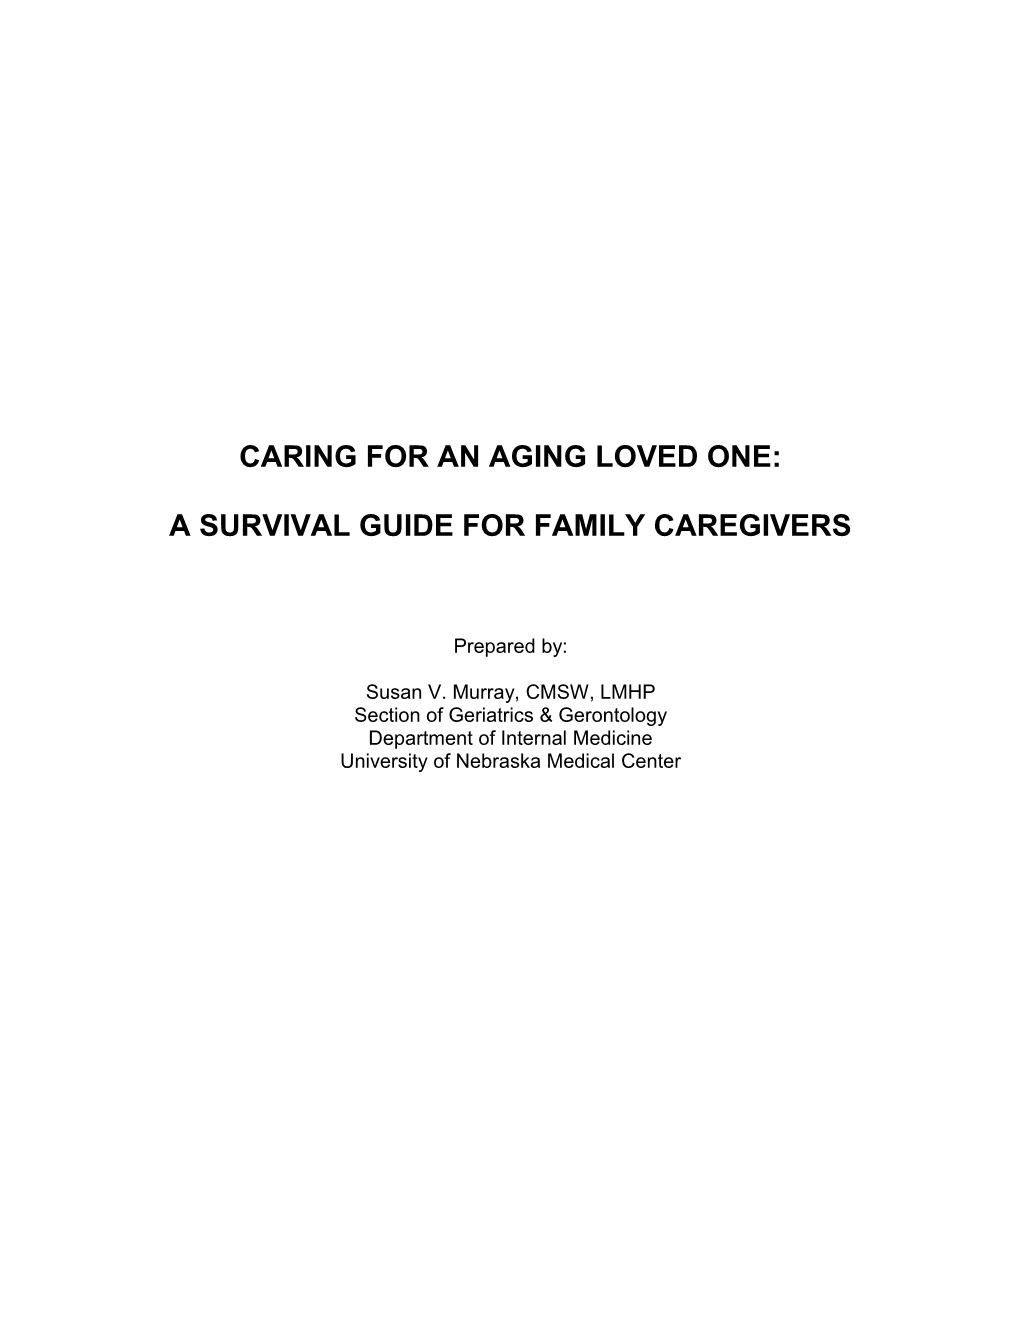 Caring for an Aging Loved One: a Survival Guide for Family Caregivers